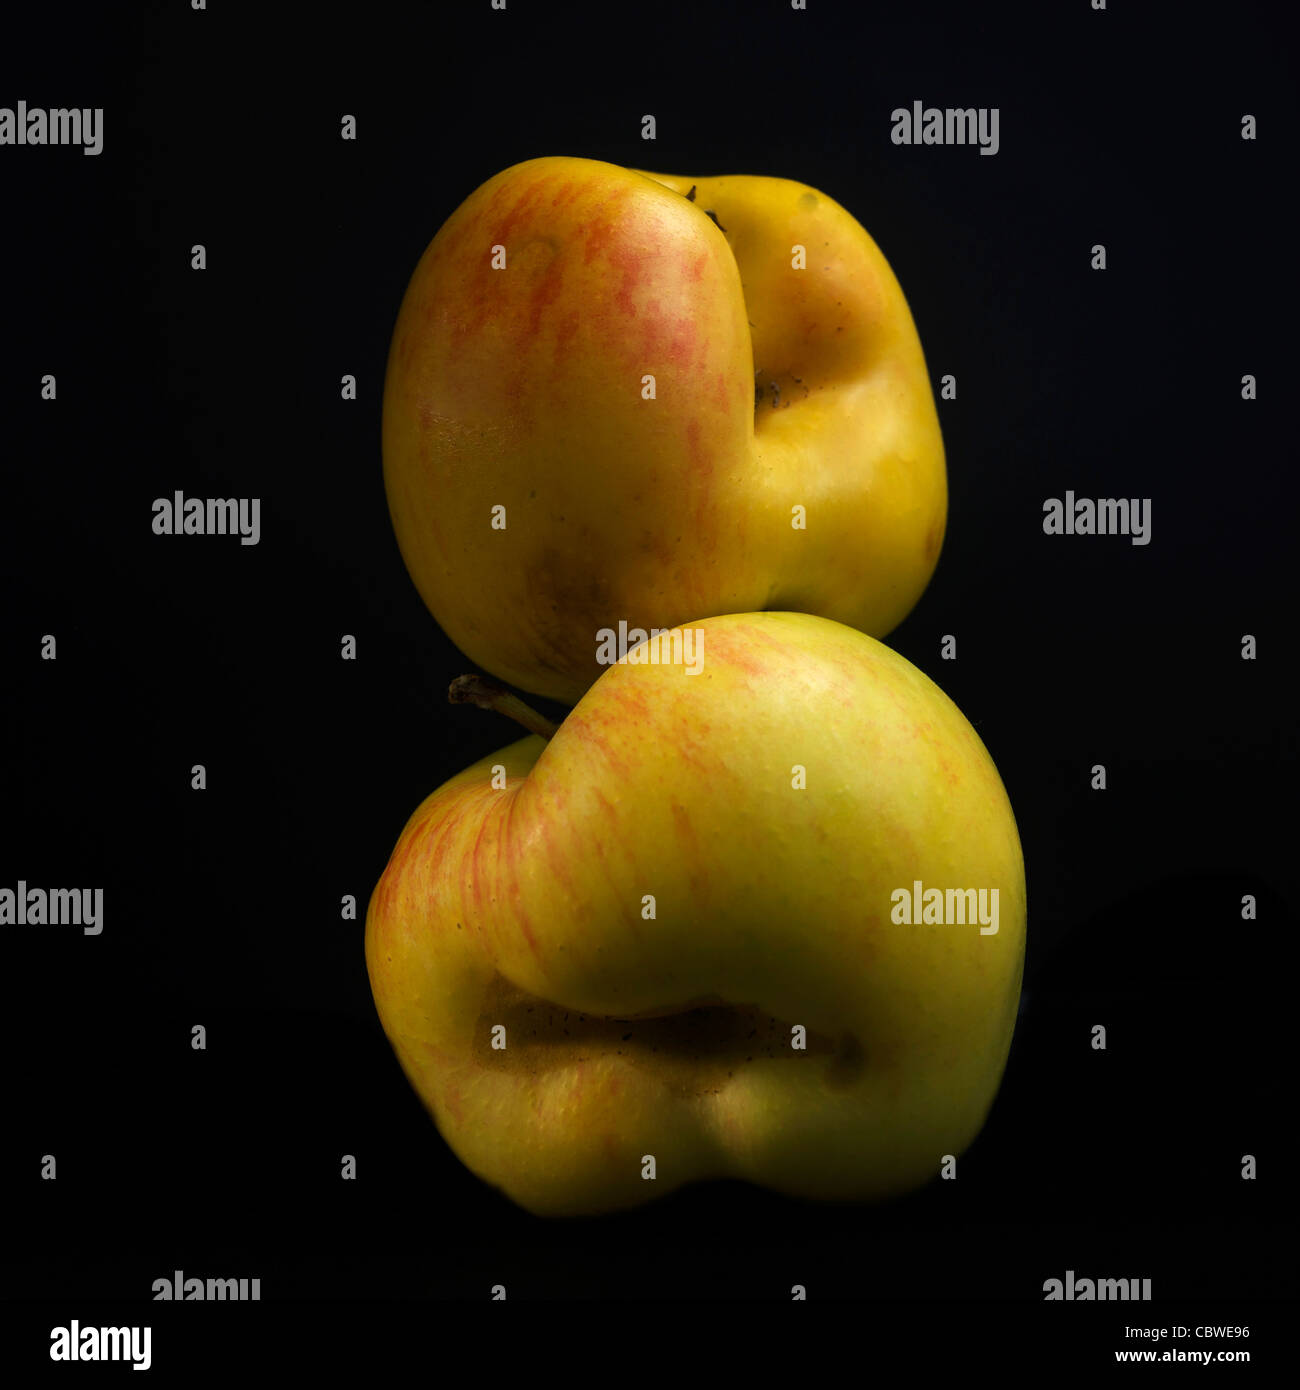 Two damaged apples stacked. Stock Photo